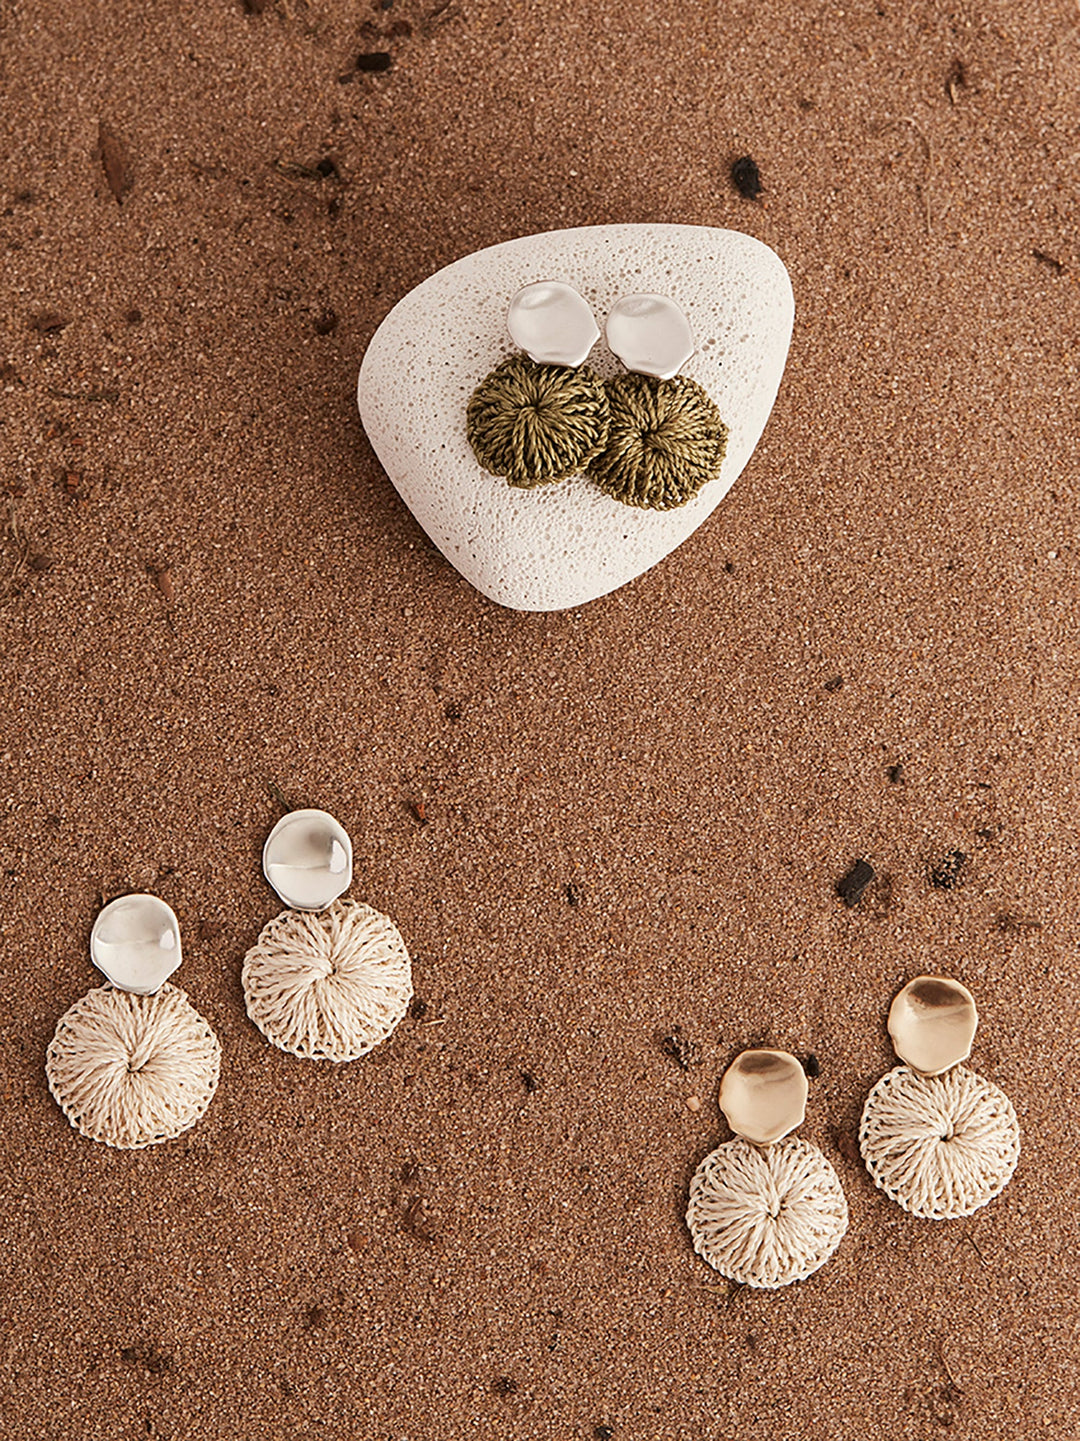 Handwoven natural fibre disc earrings on a stone flat lay still life.